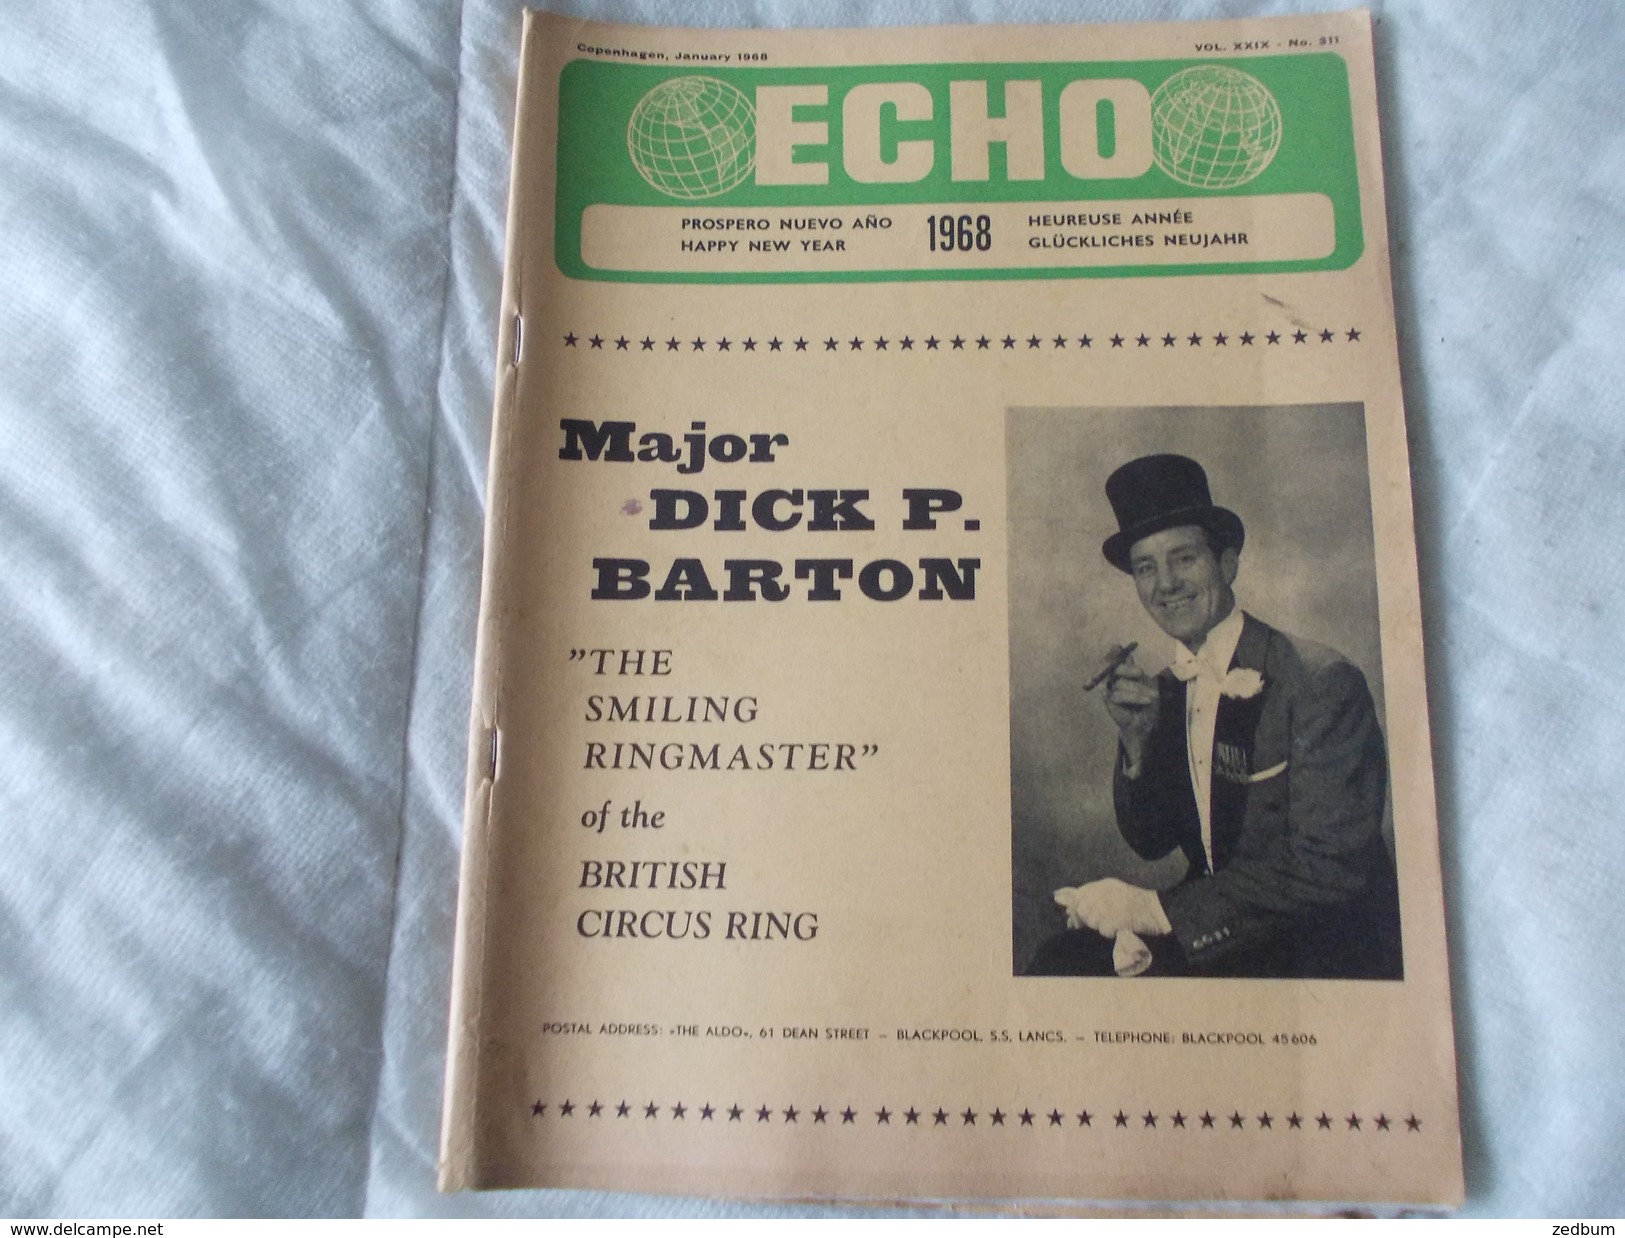 ECHO LTD Professional Circus And Variety Journal Independent International N° 311 January 1968 - Divertimento